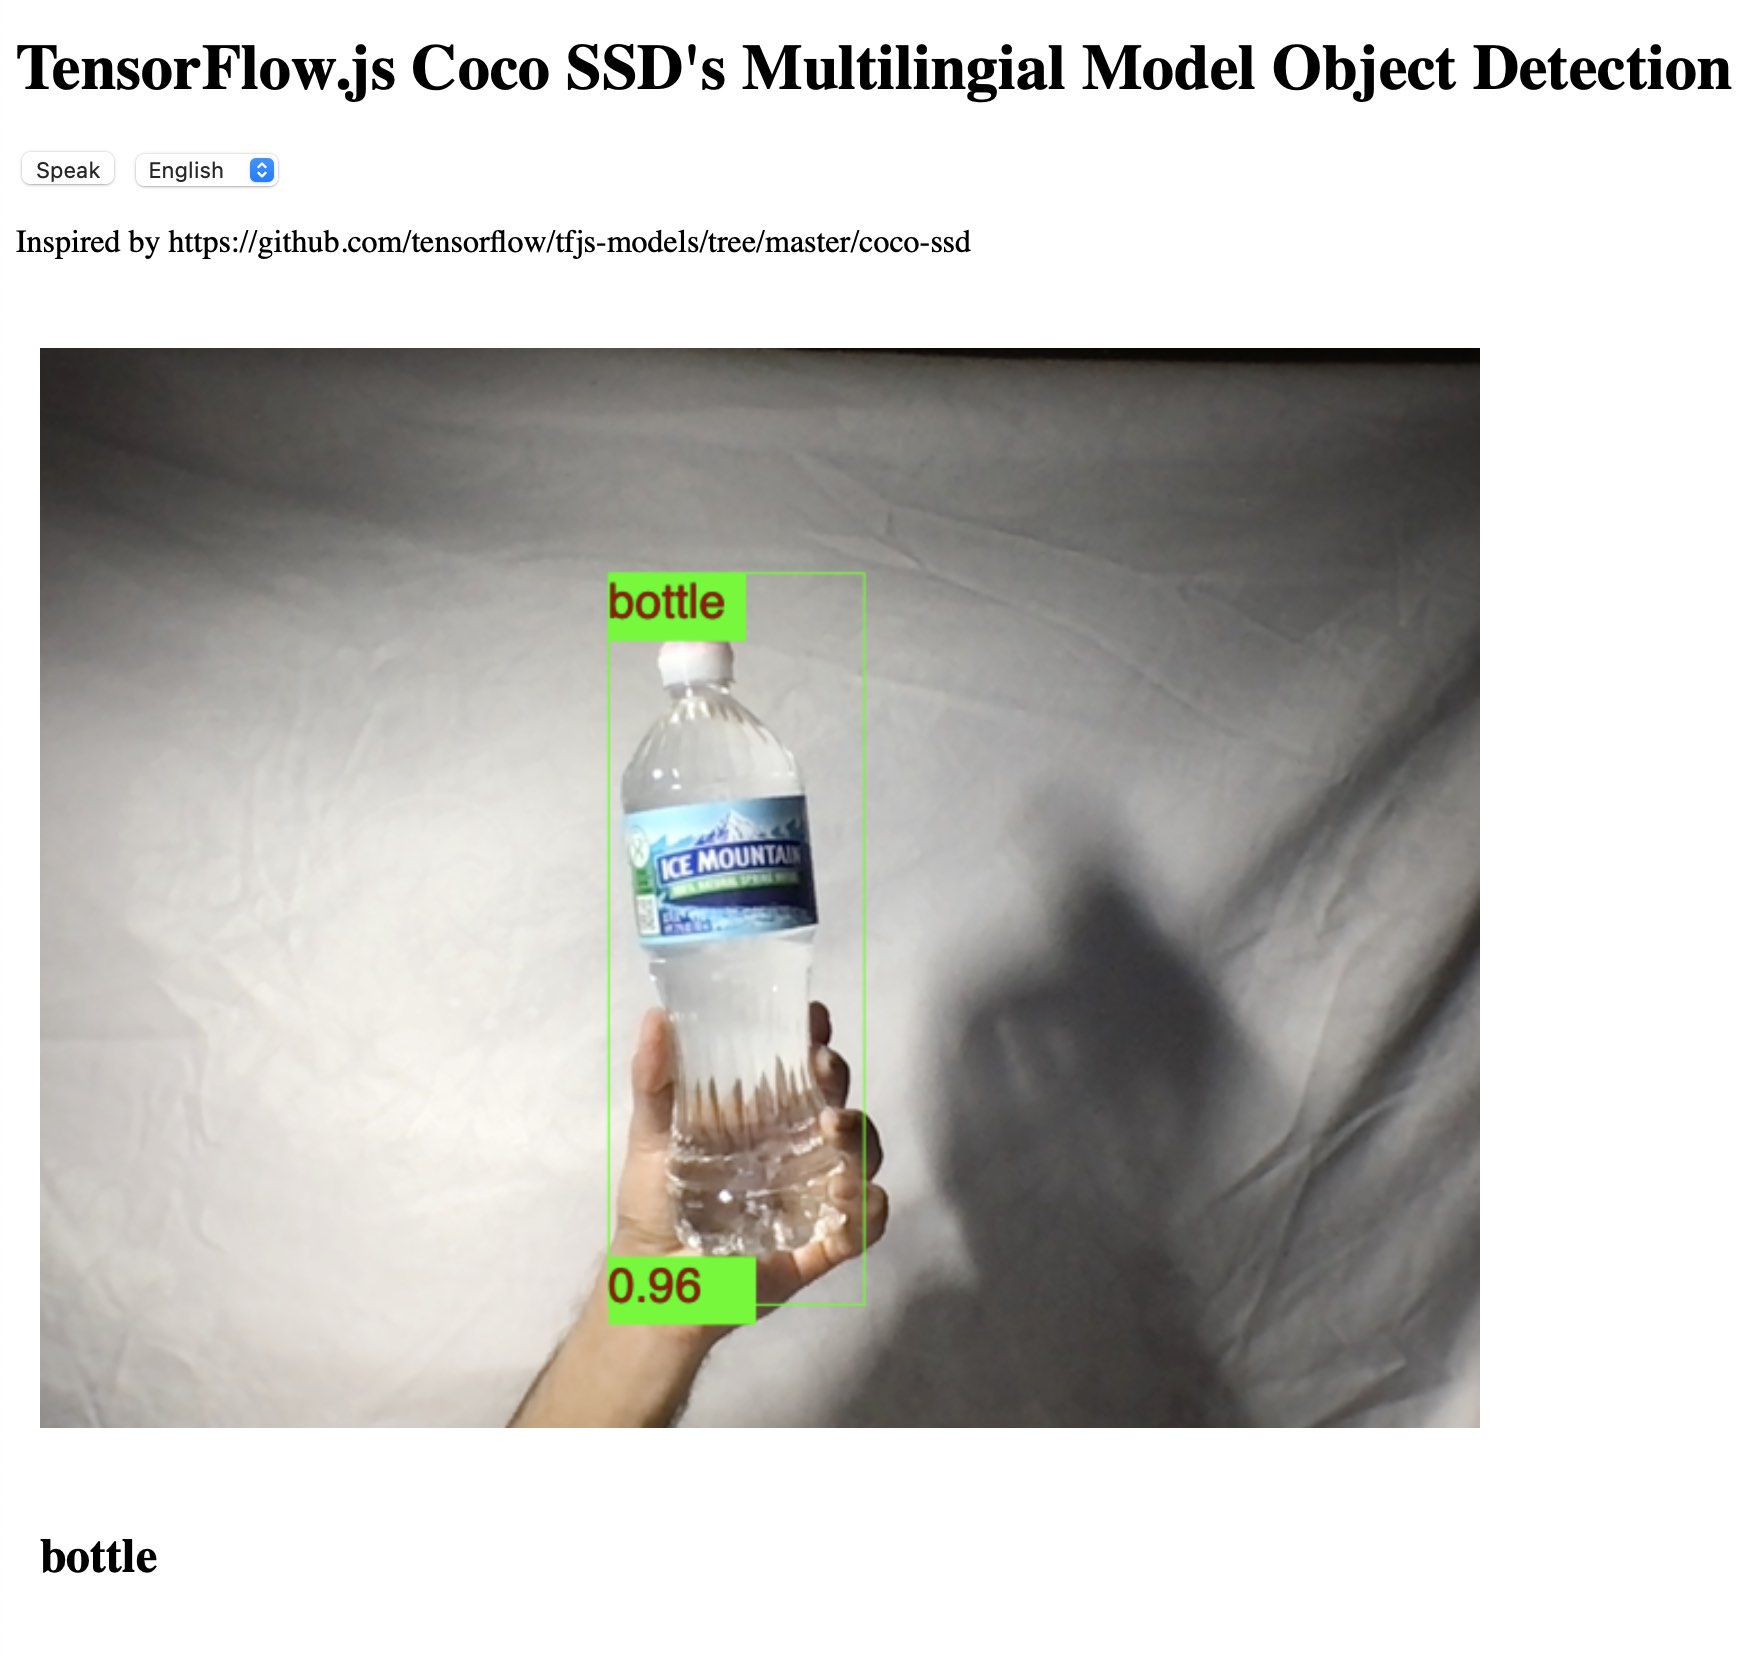 Multilingual Object Detection